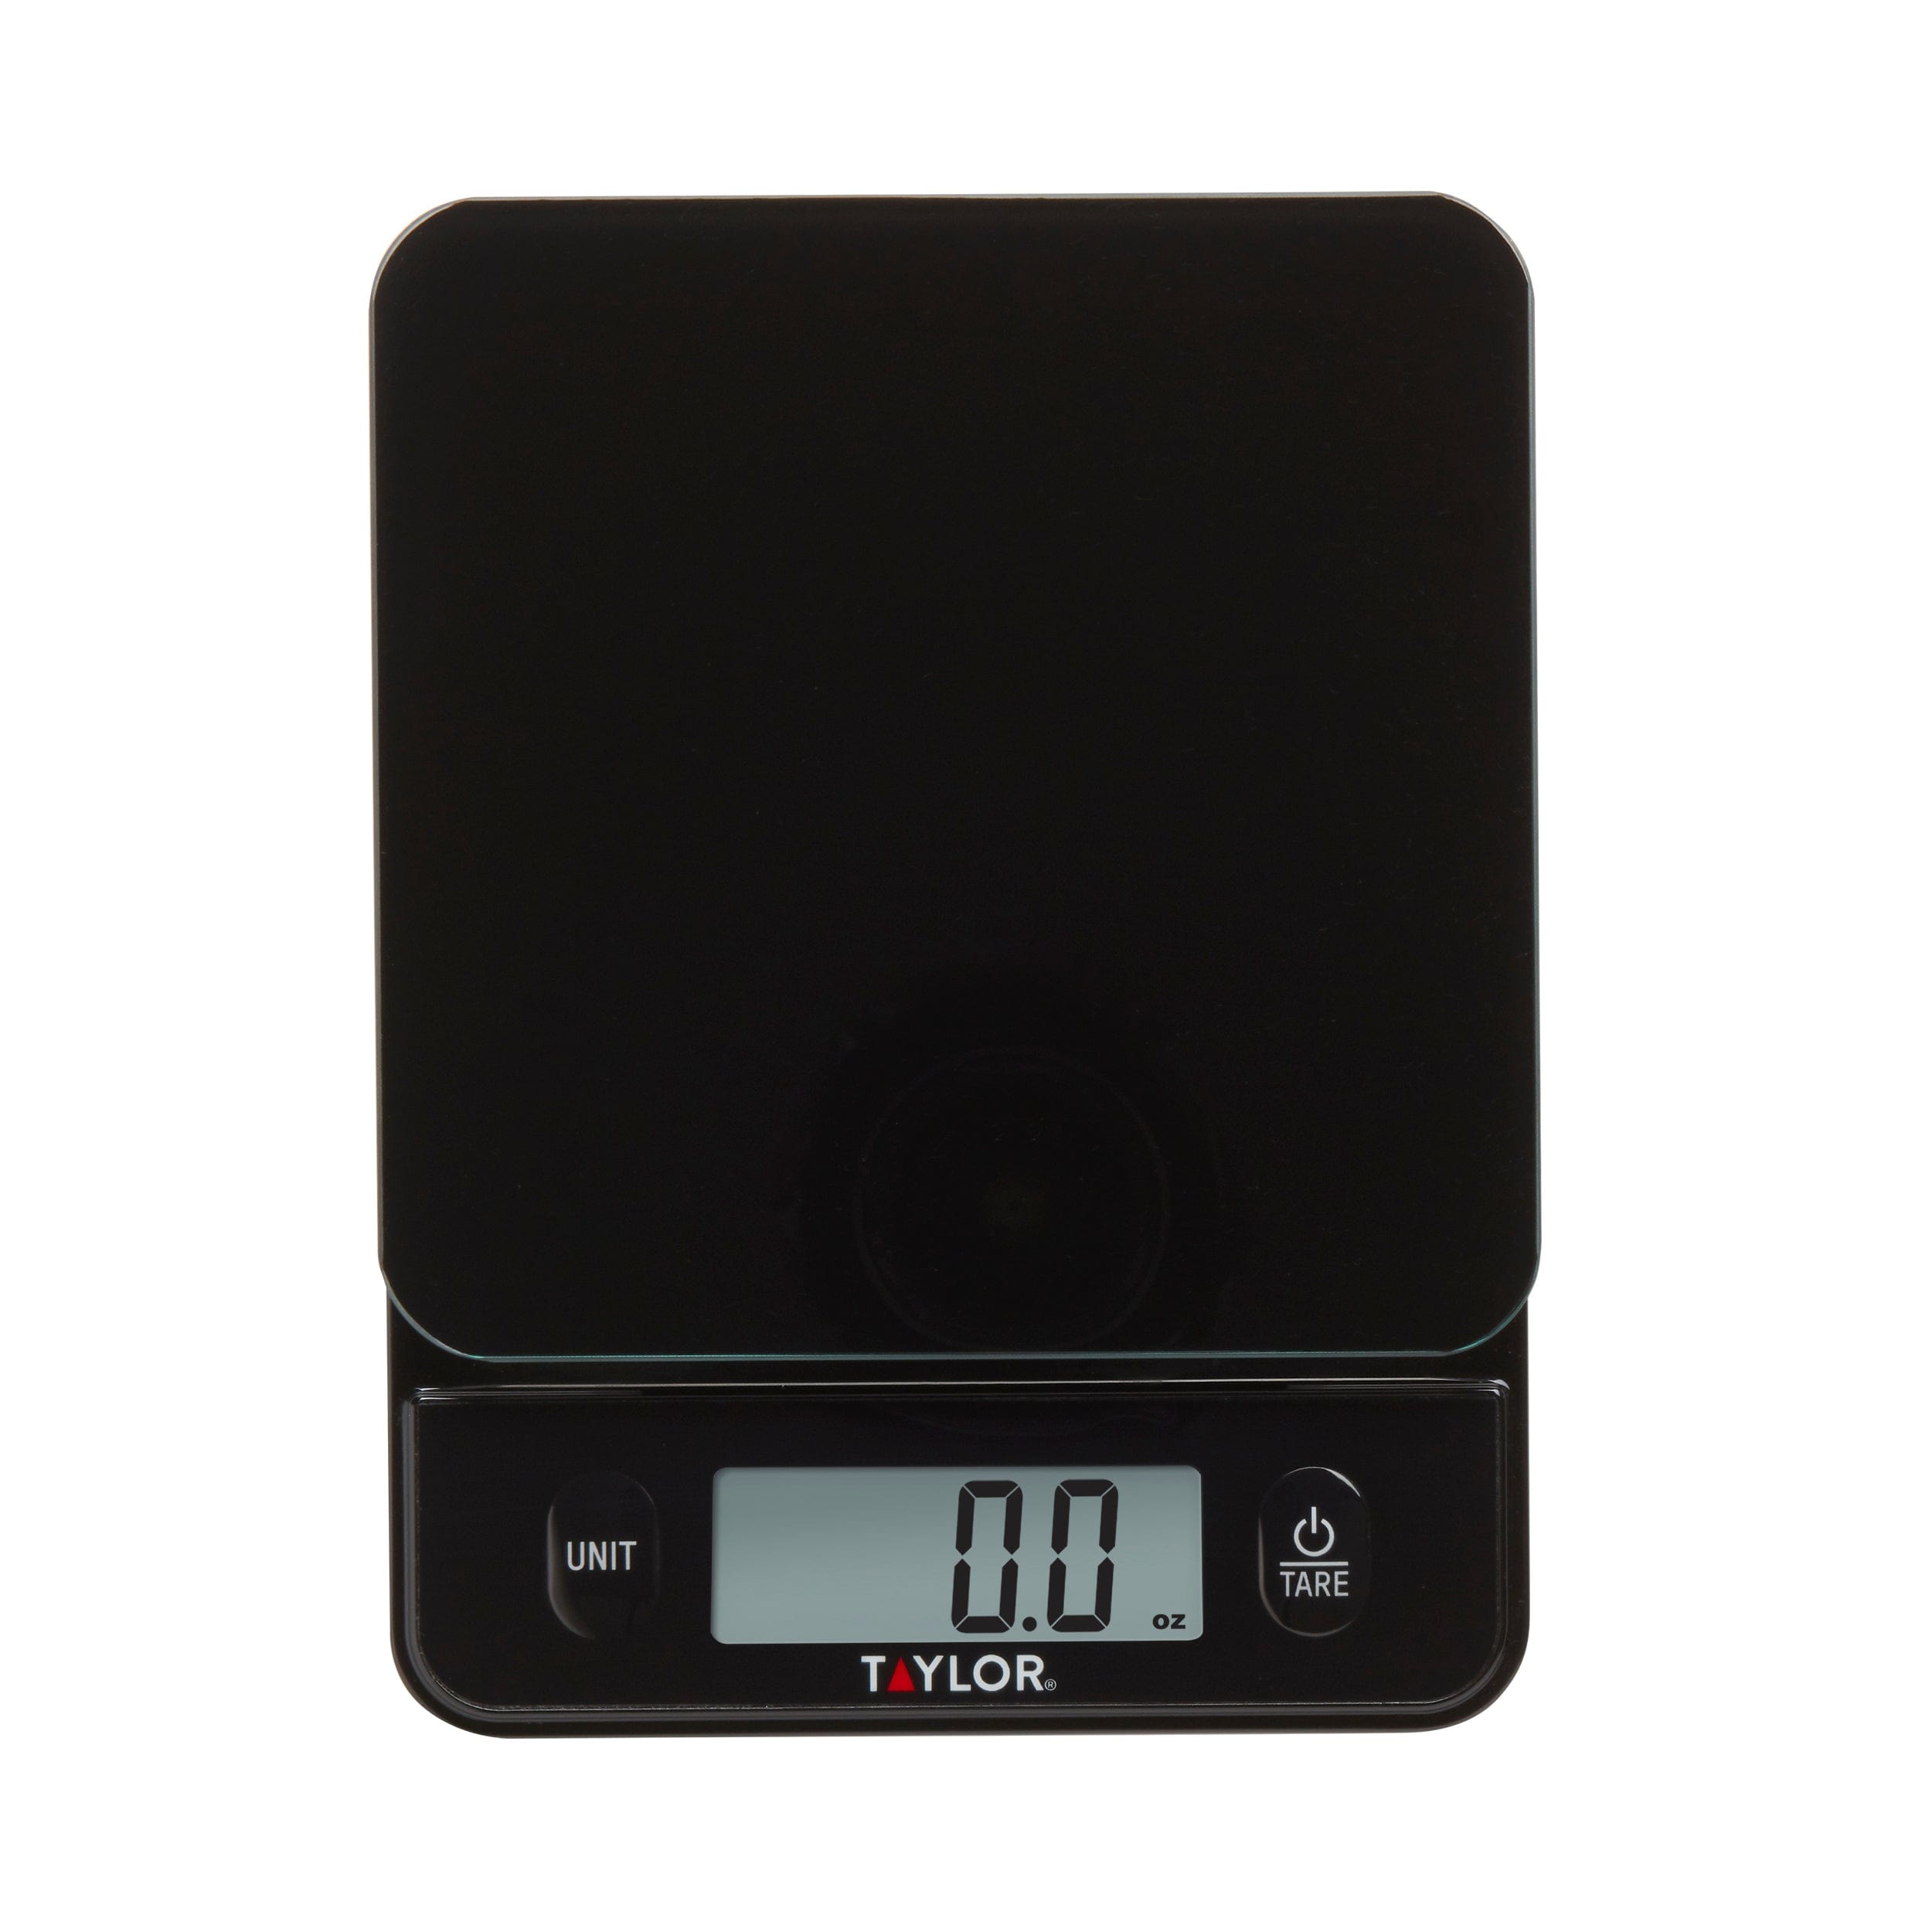 View All Digital Postal Scales